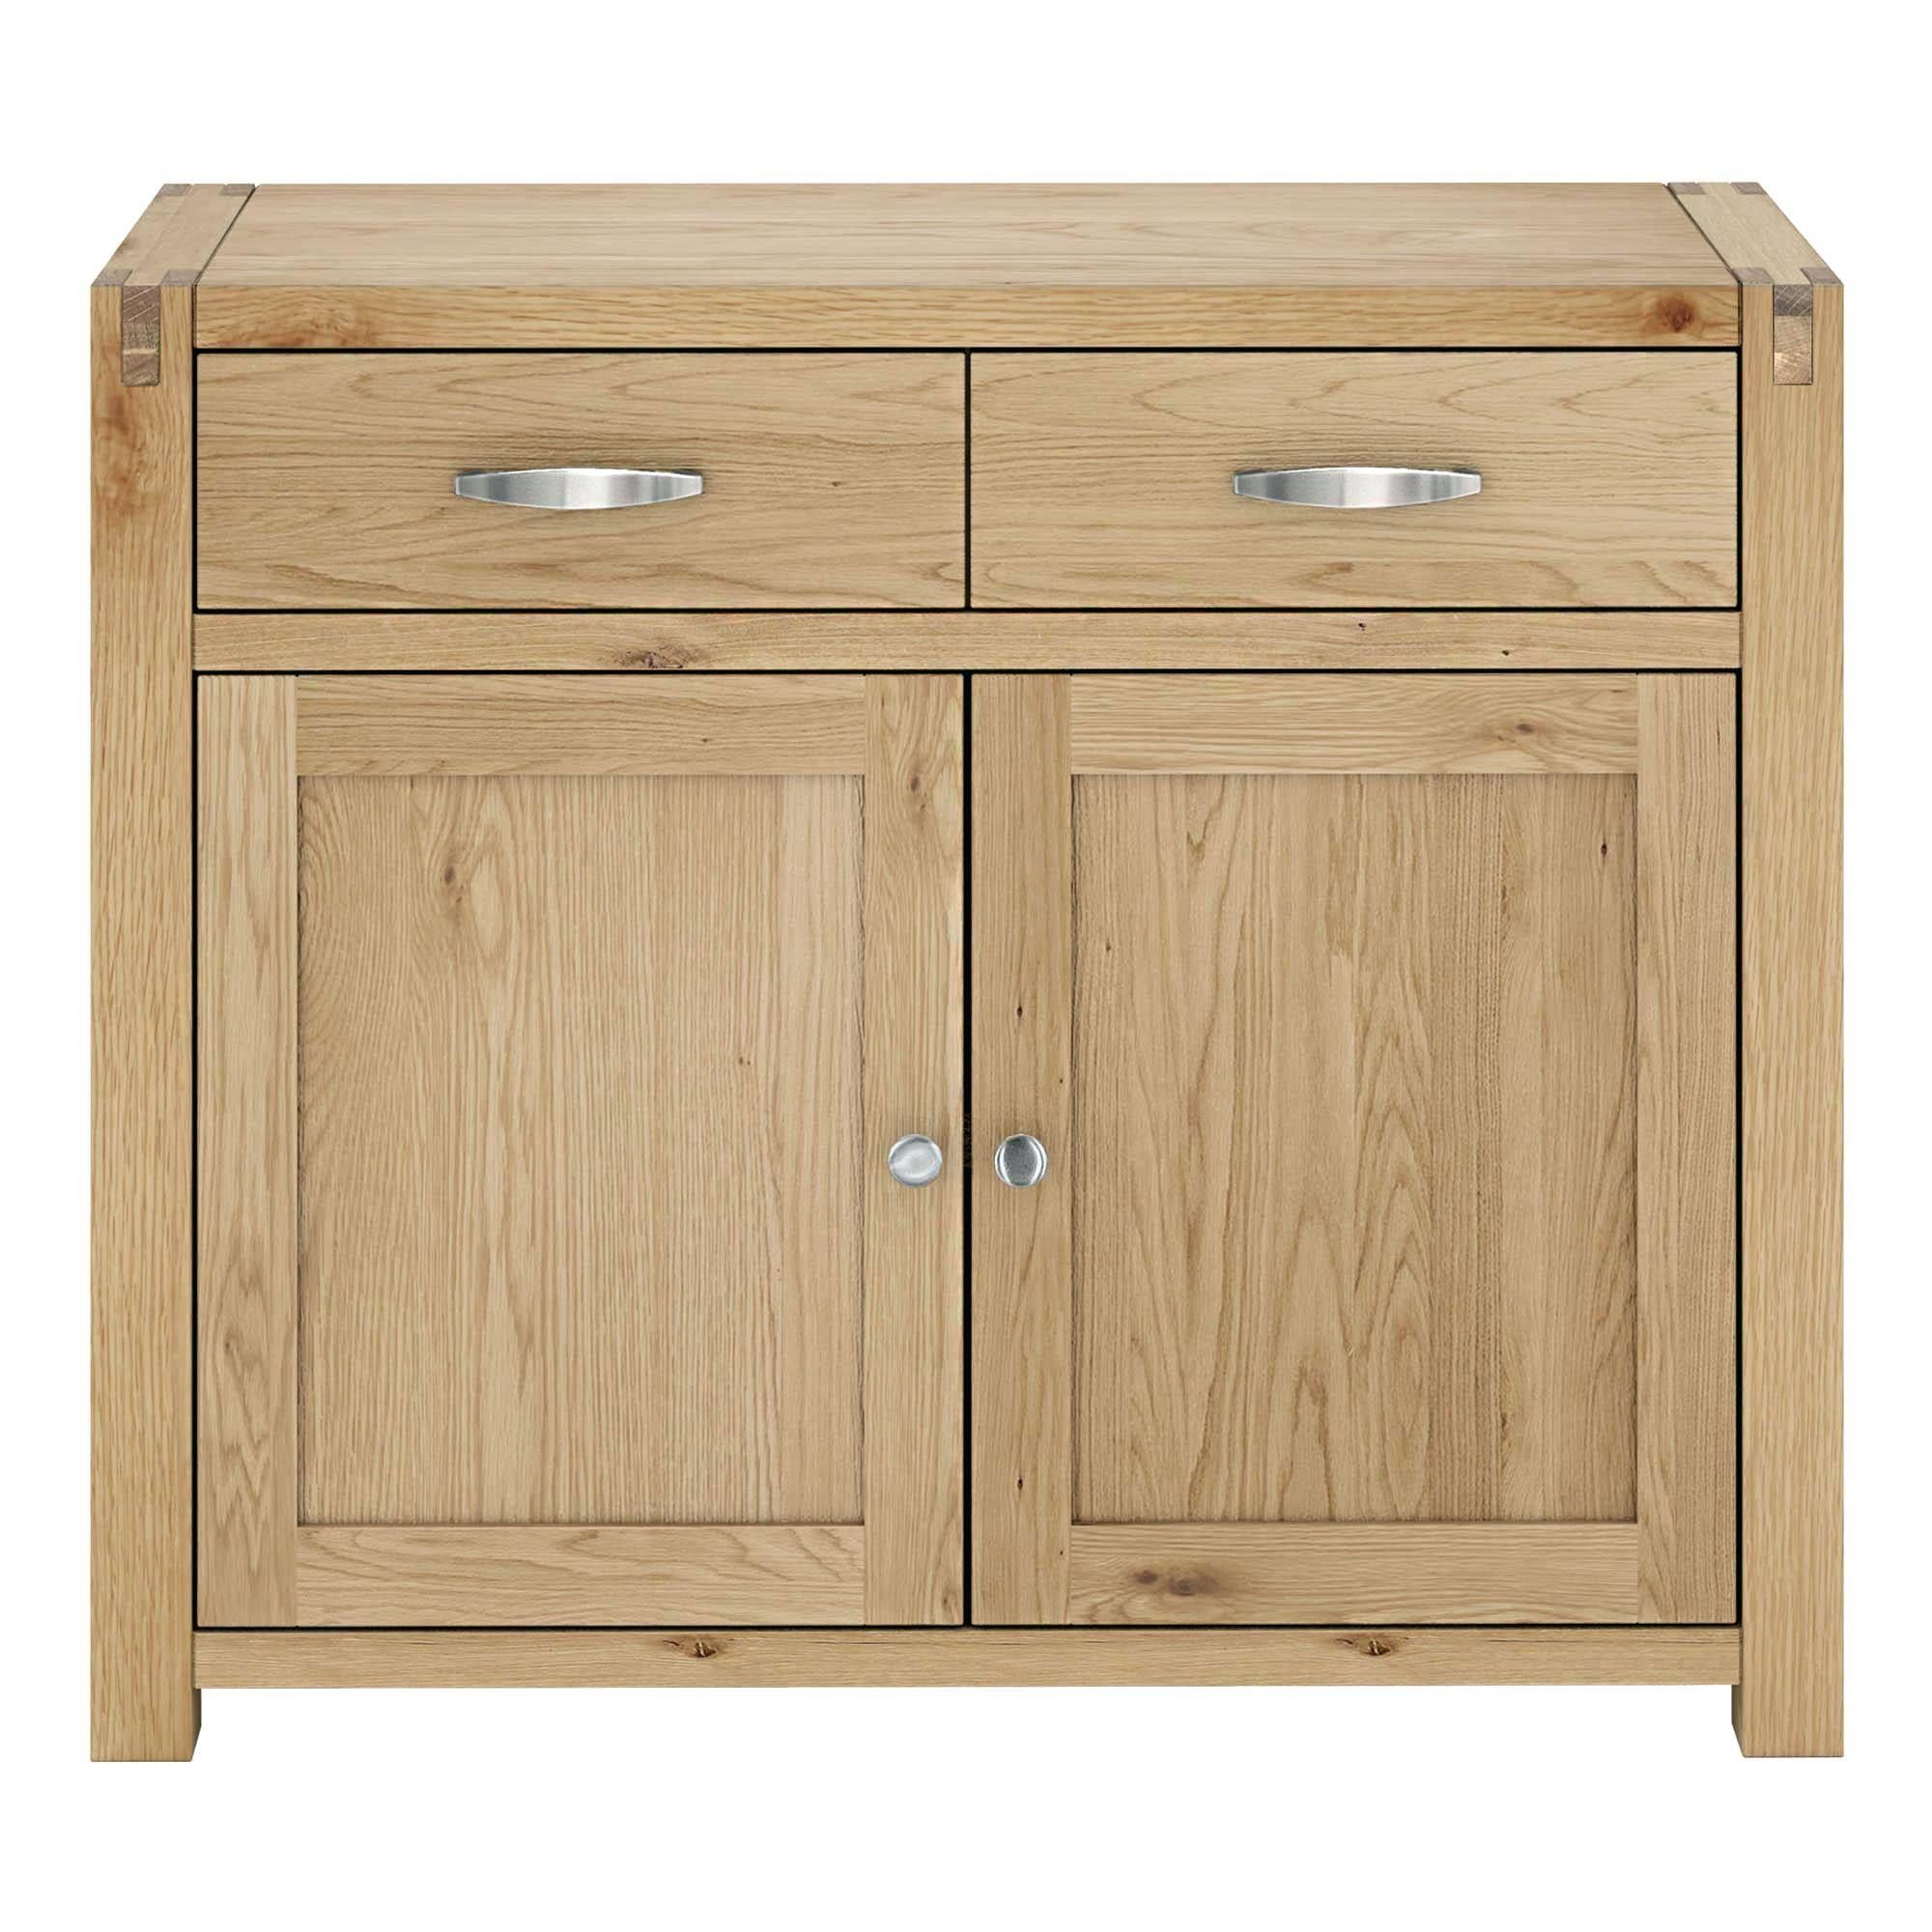 Oak Sideboards Express Delivery Alto Natural Solid Oak Large With 2017 Solid Oak Sideboards For Sale (View 4 of 15)